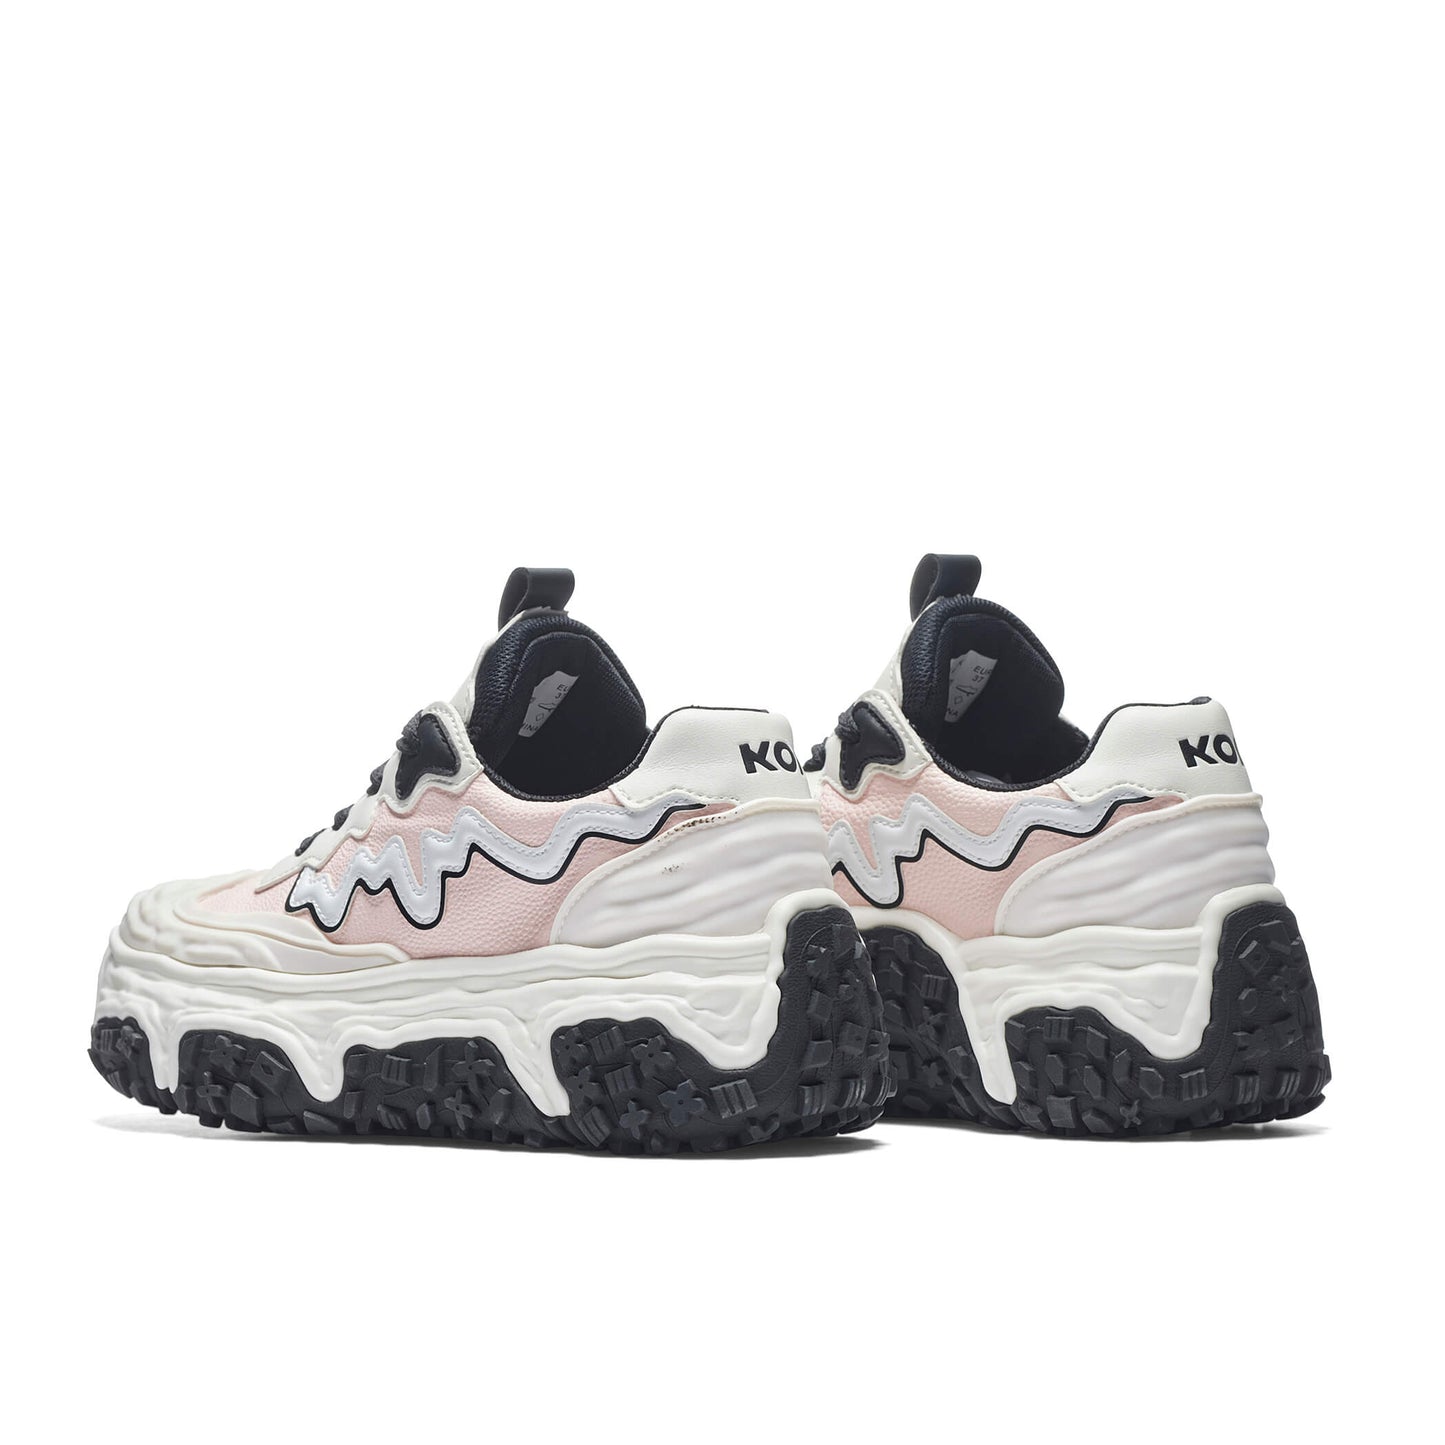 Layer Cake Chunky Trainers - White - KOI Footwear - Back View